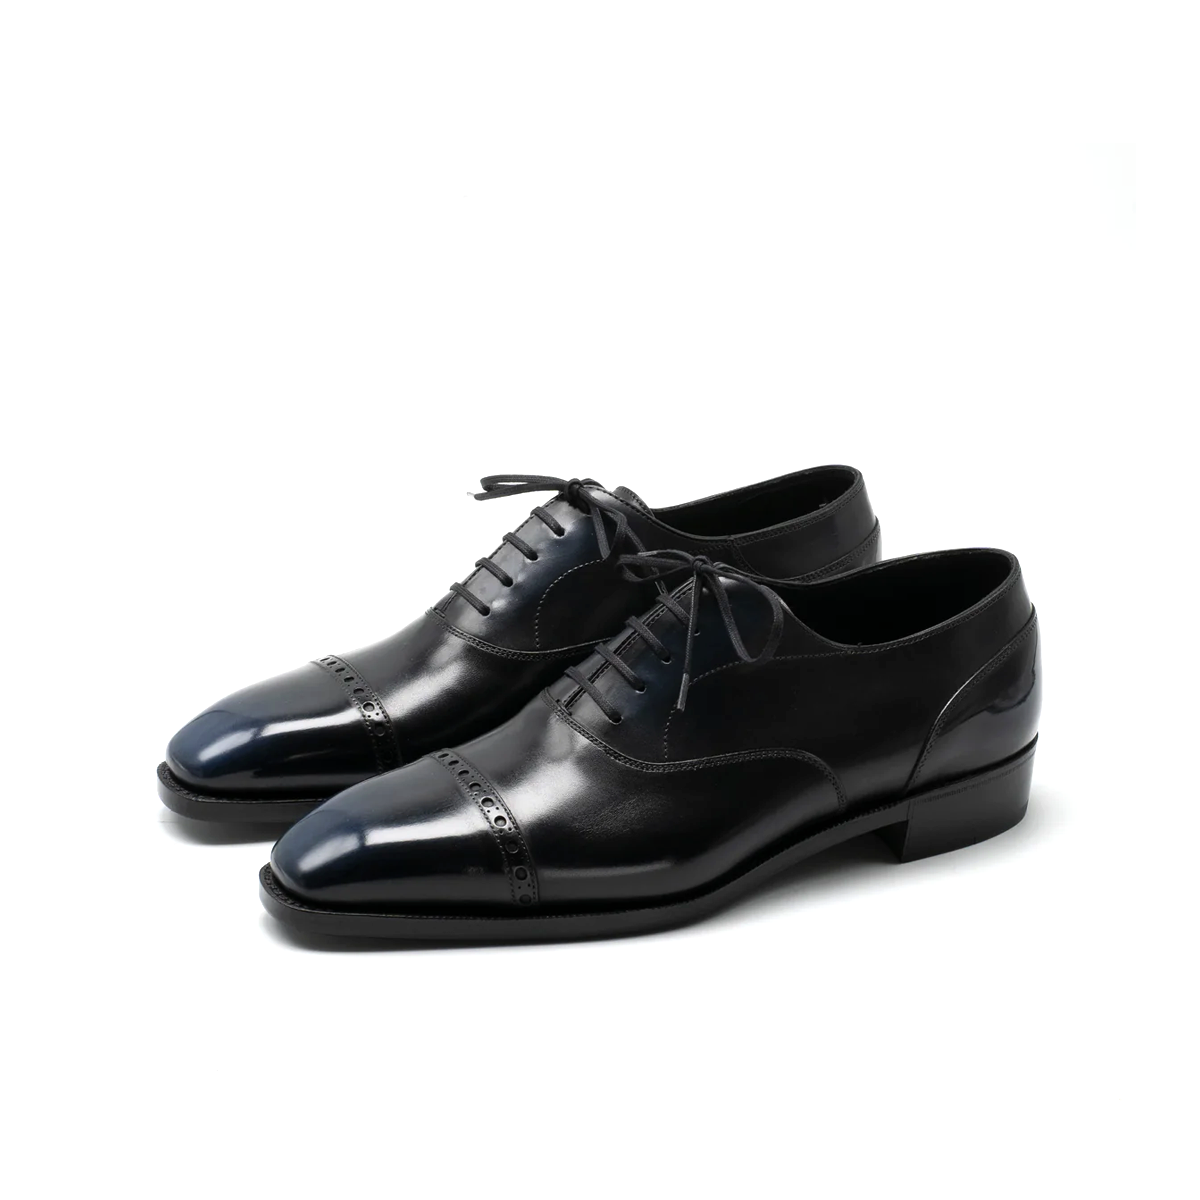 Harrison Buckled Brogues Oxford Shoes